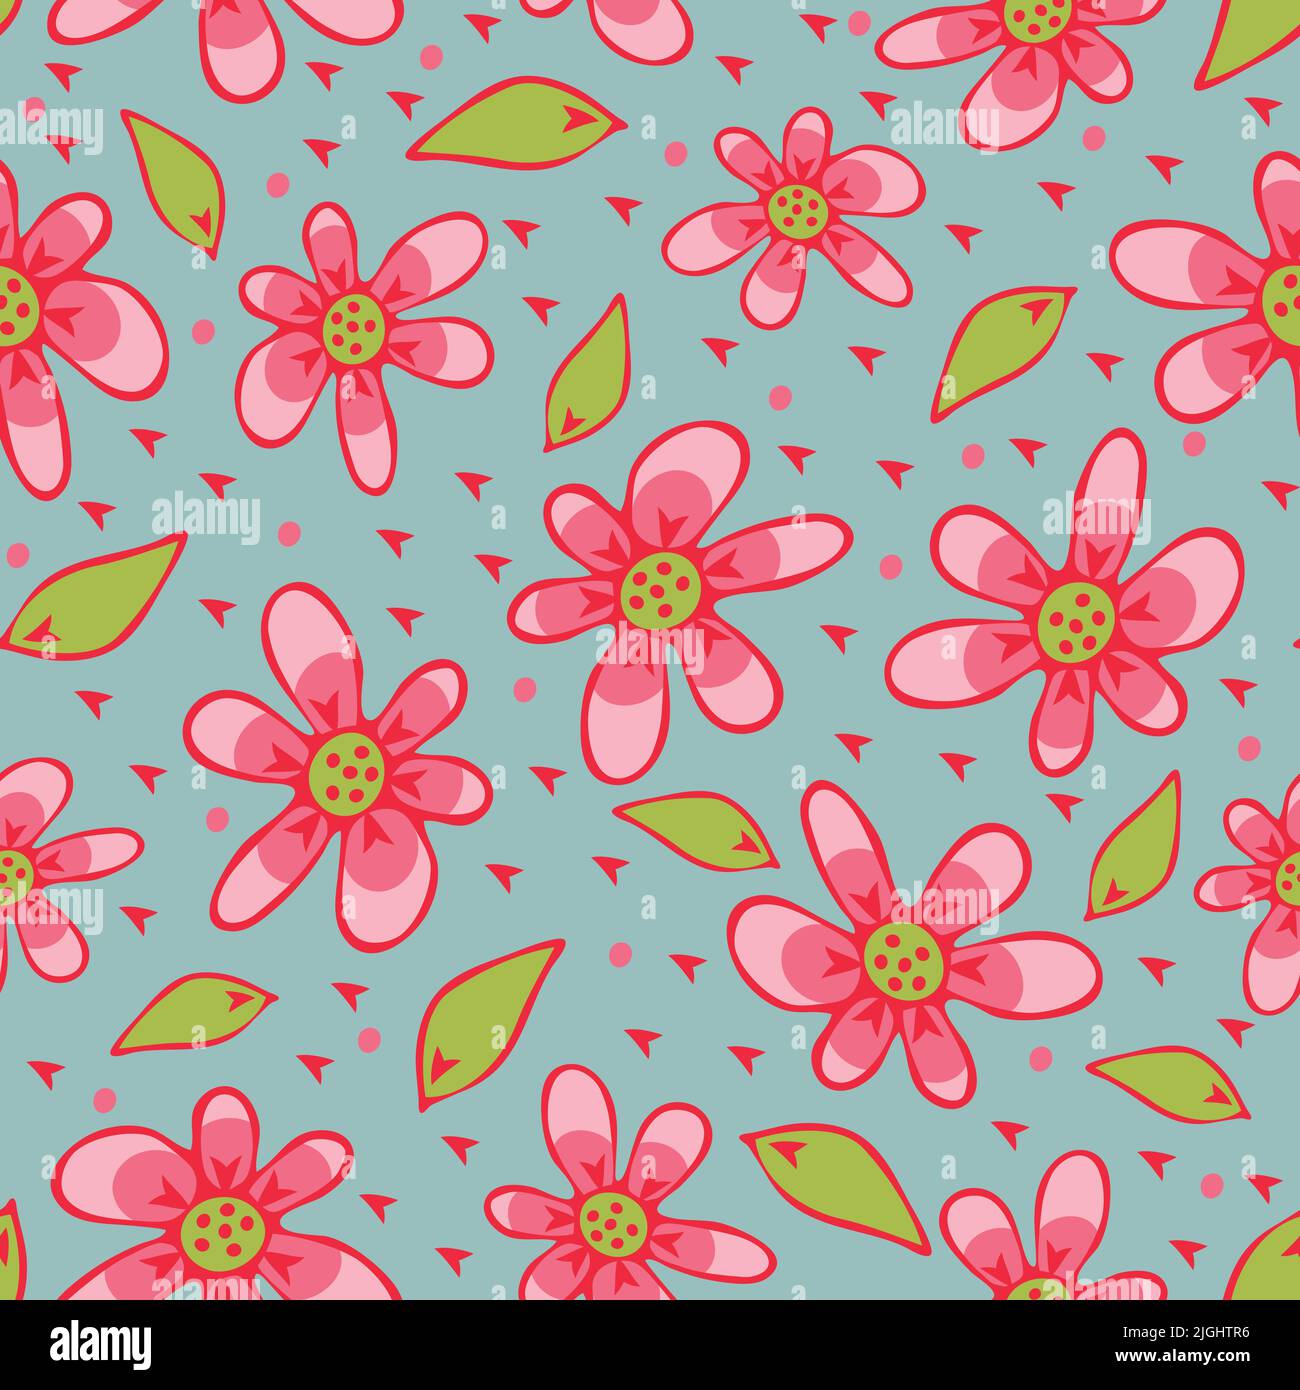 Seamless vector pattern with pink flowers on blue background. Cute floral wallpaper design. Hand drown summer garden fashion textile. Stock Vector